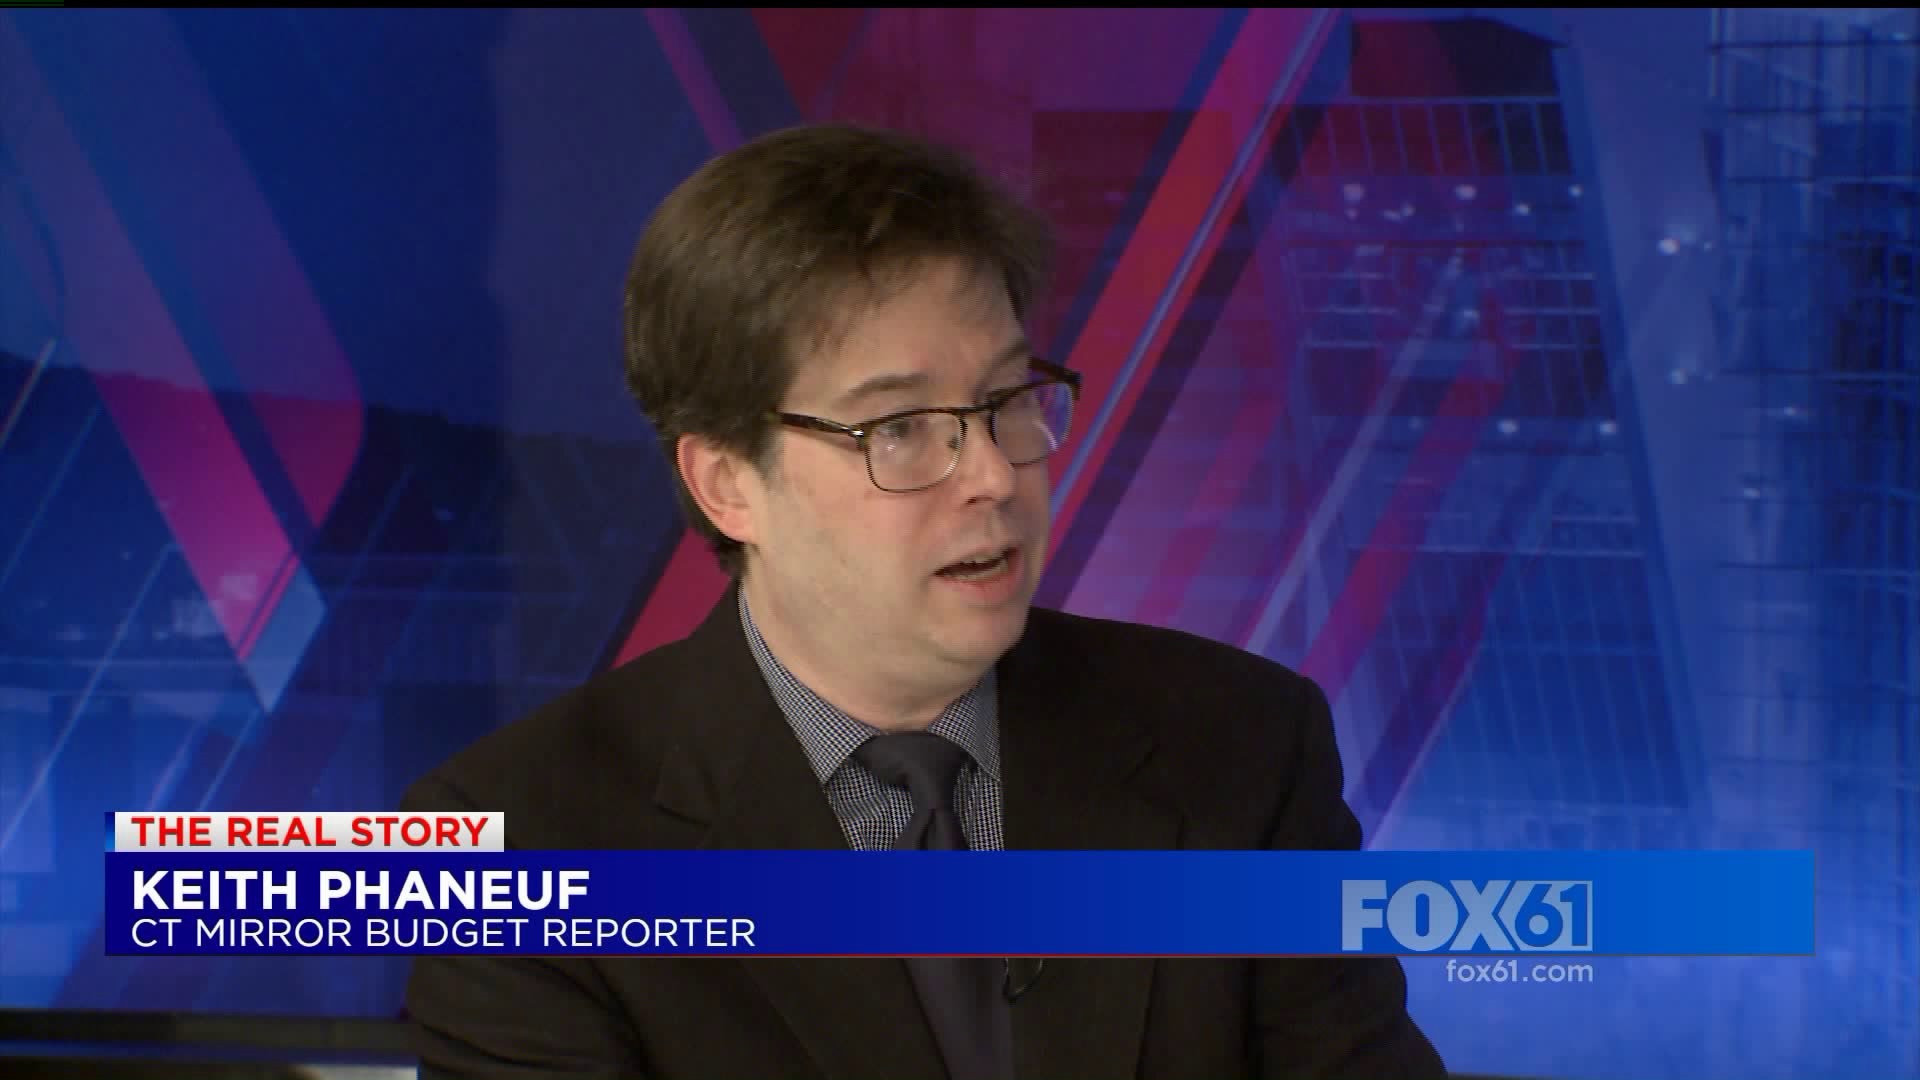 RealStory pt 1 - Keith Phaneuf on state budget